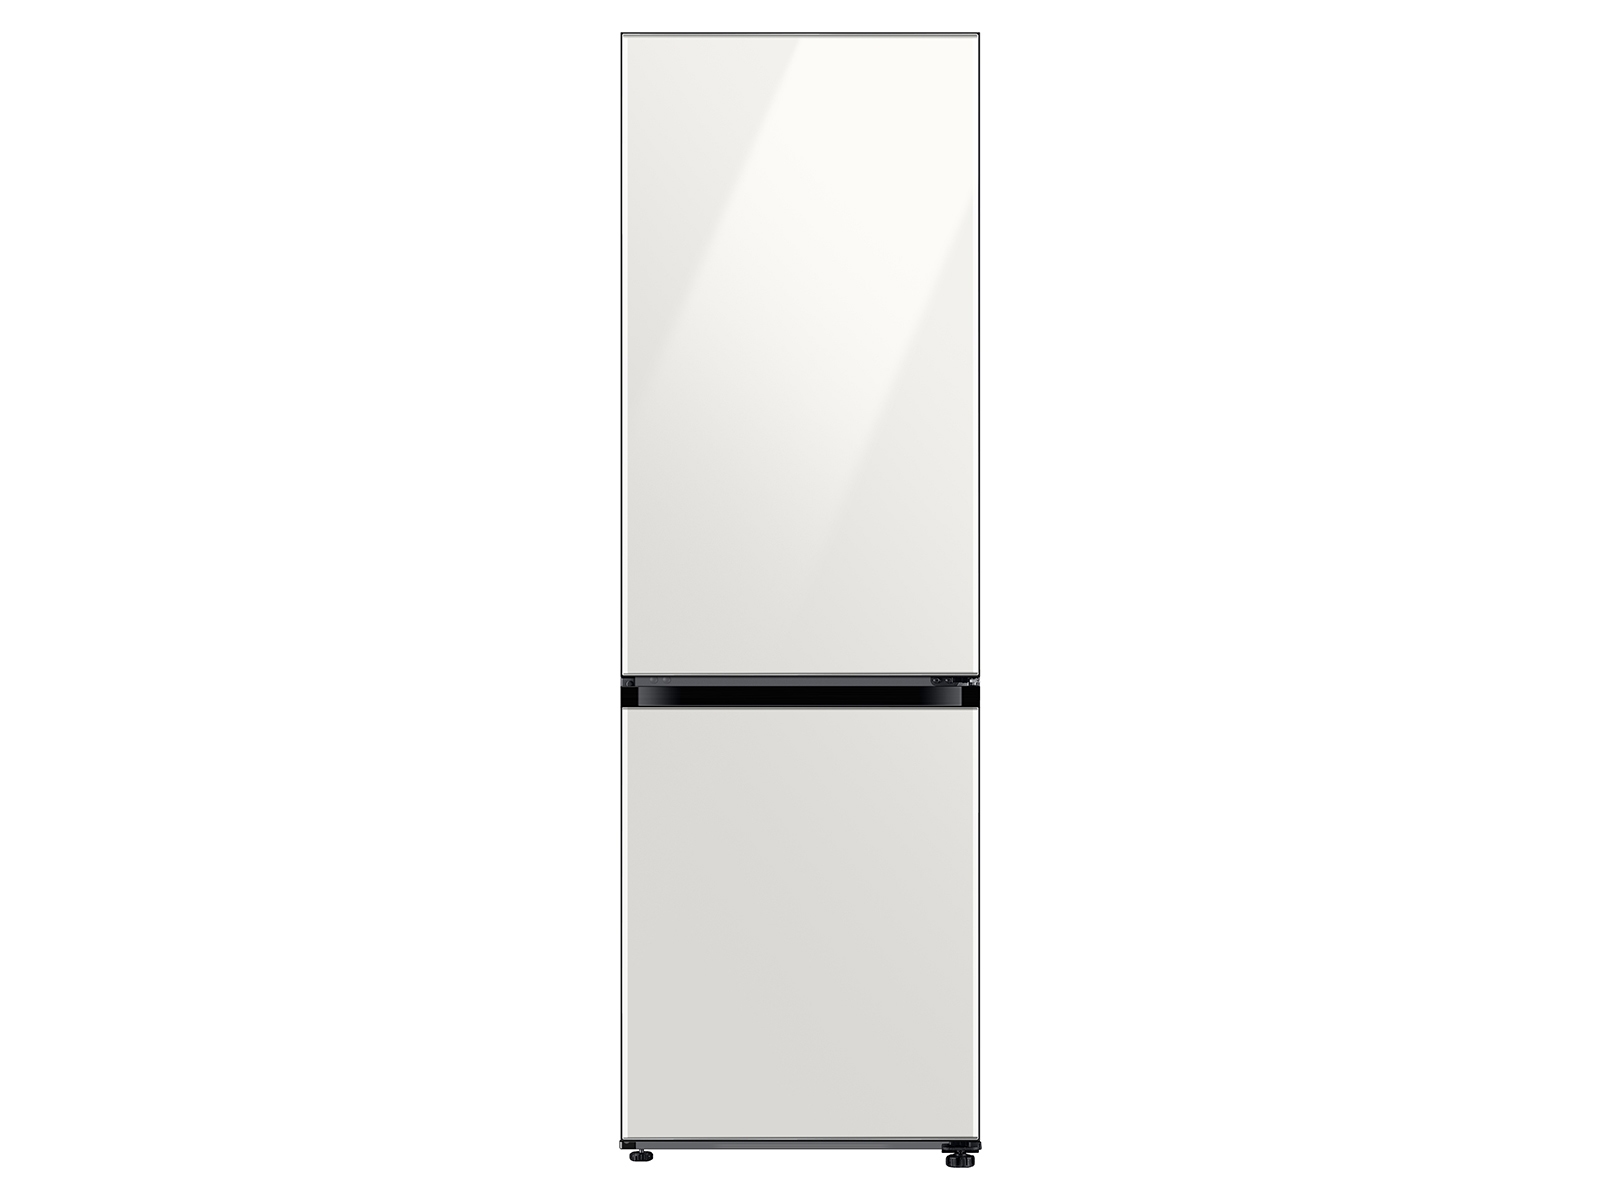 Samsung 12.0 cu. Ft. Bespoke Bottom Freezer Refrigerator with Flexible Design in White Glass(RB12A300635/AA)